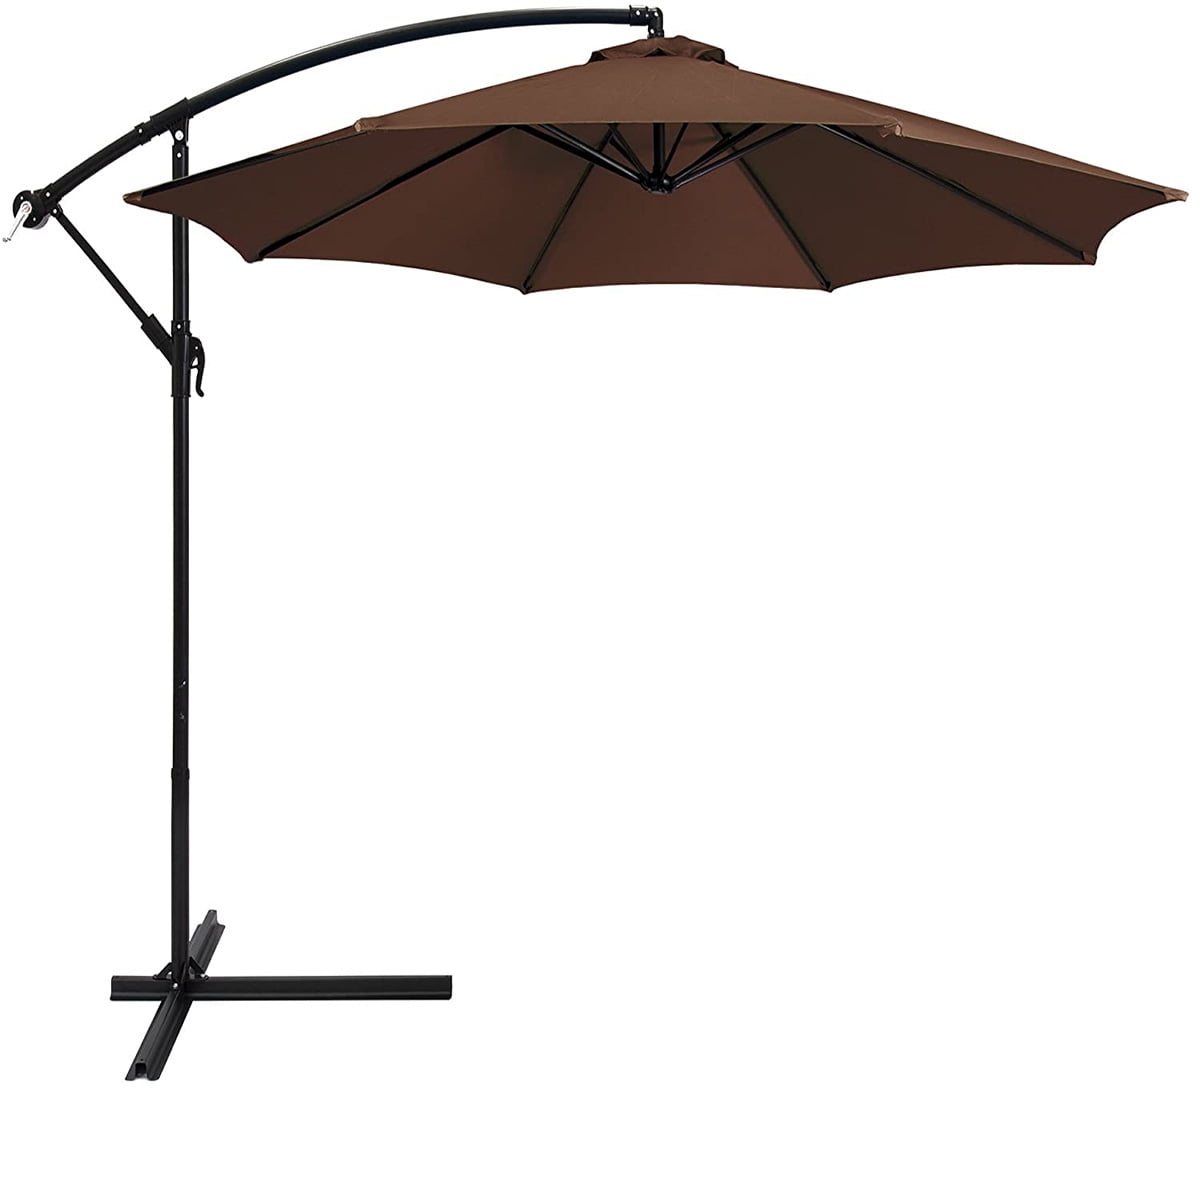 New Hanging Patio Umbrella 10ft Offset Rectangular Cantilever with Cross Base 